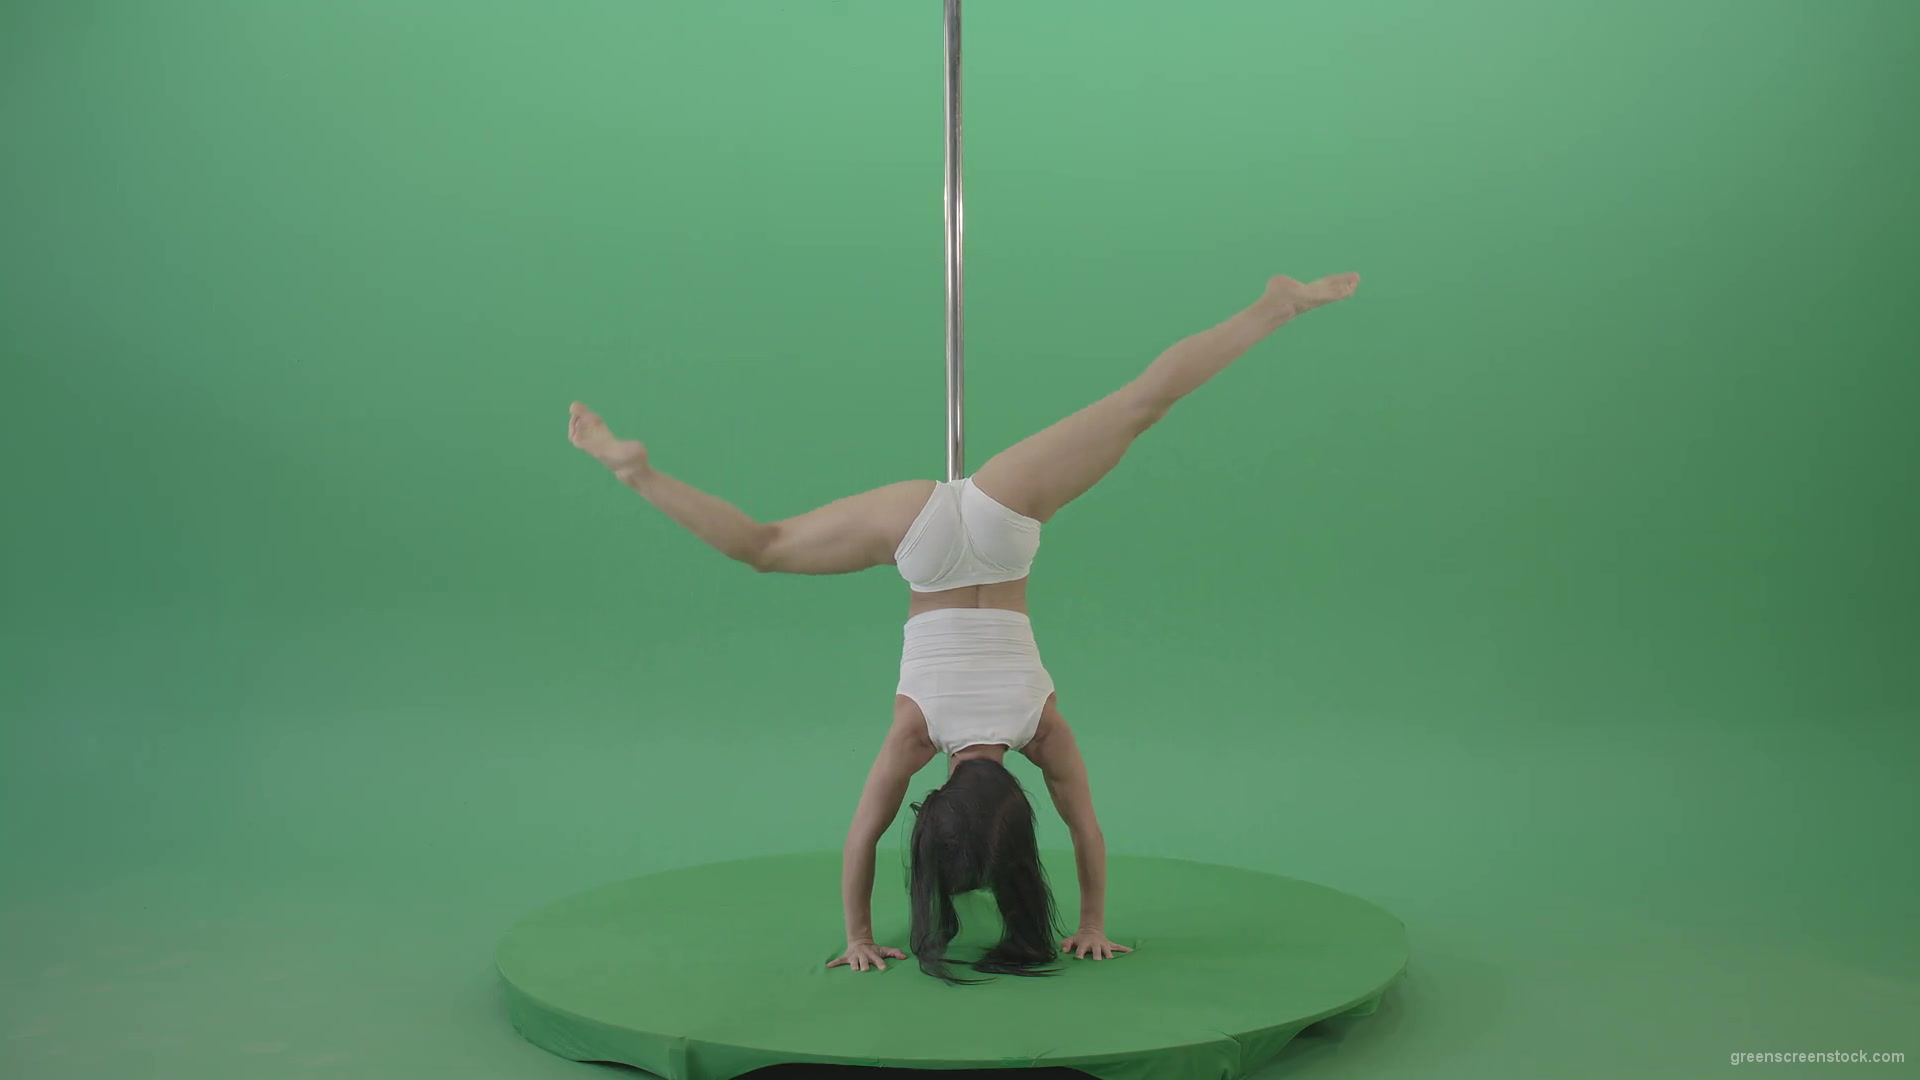 Pole-Dance-Girl-waving-two-legs-isolated-on-green-screen-4K-Video-Footage-1920_009 Green Screen Stock